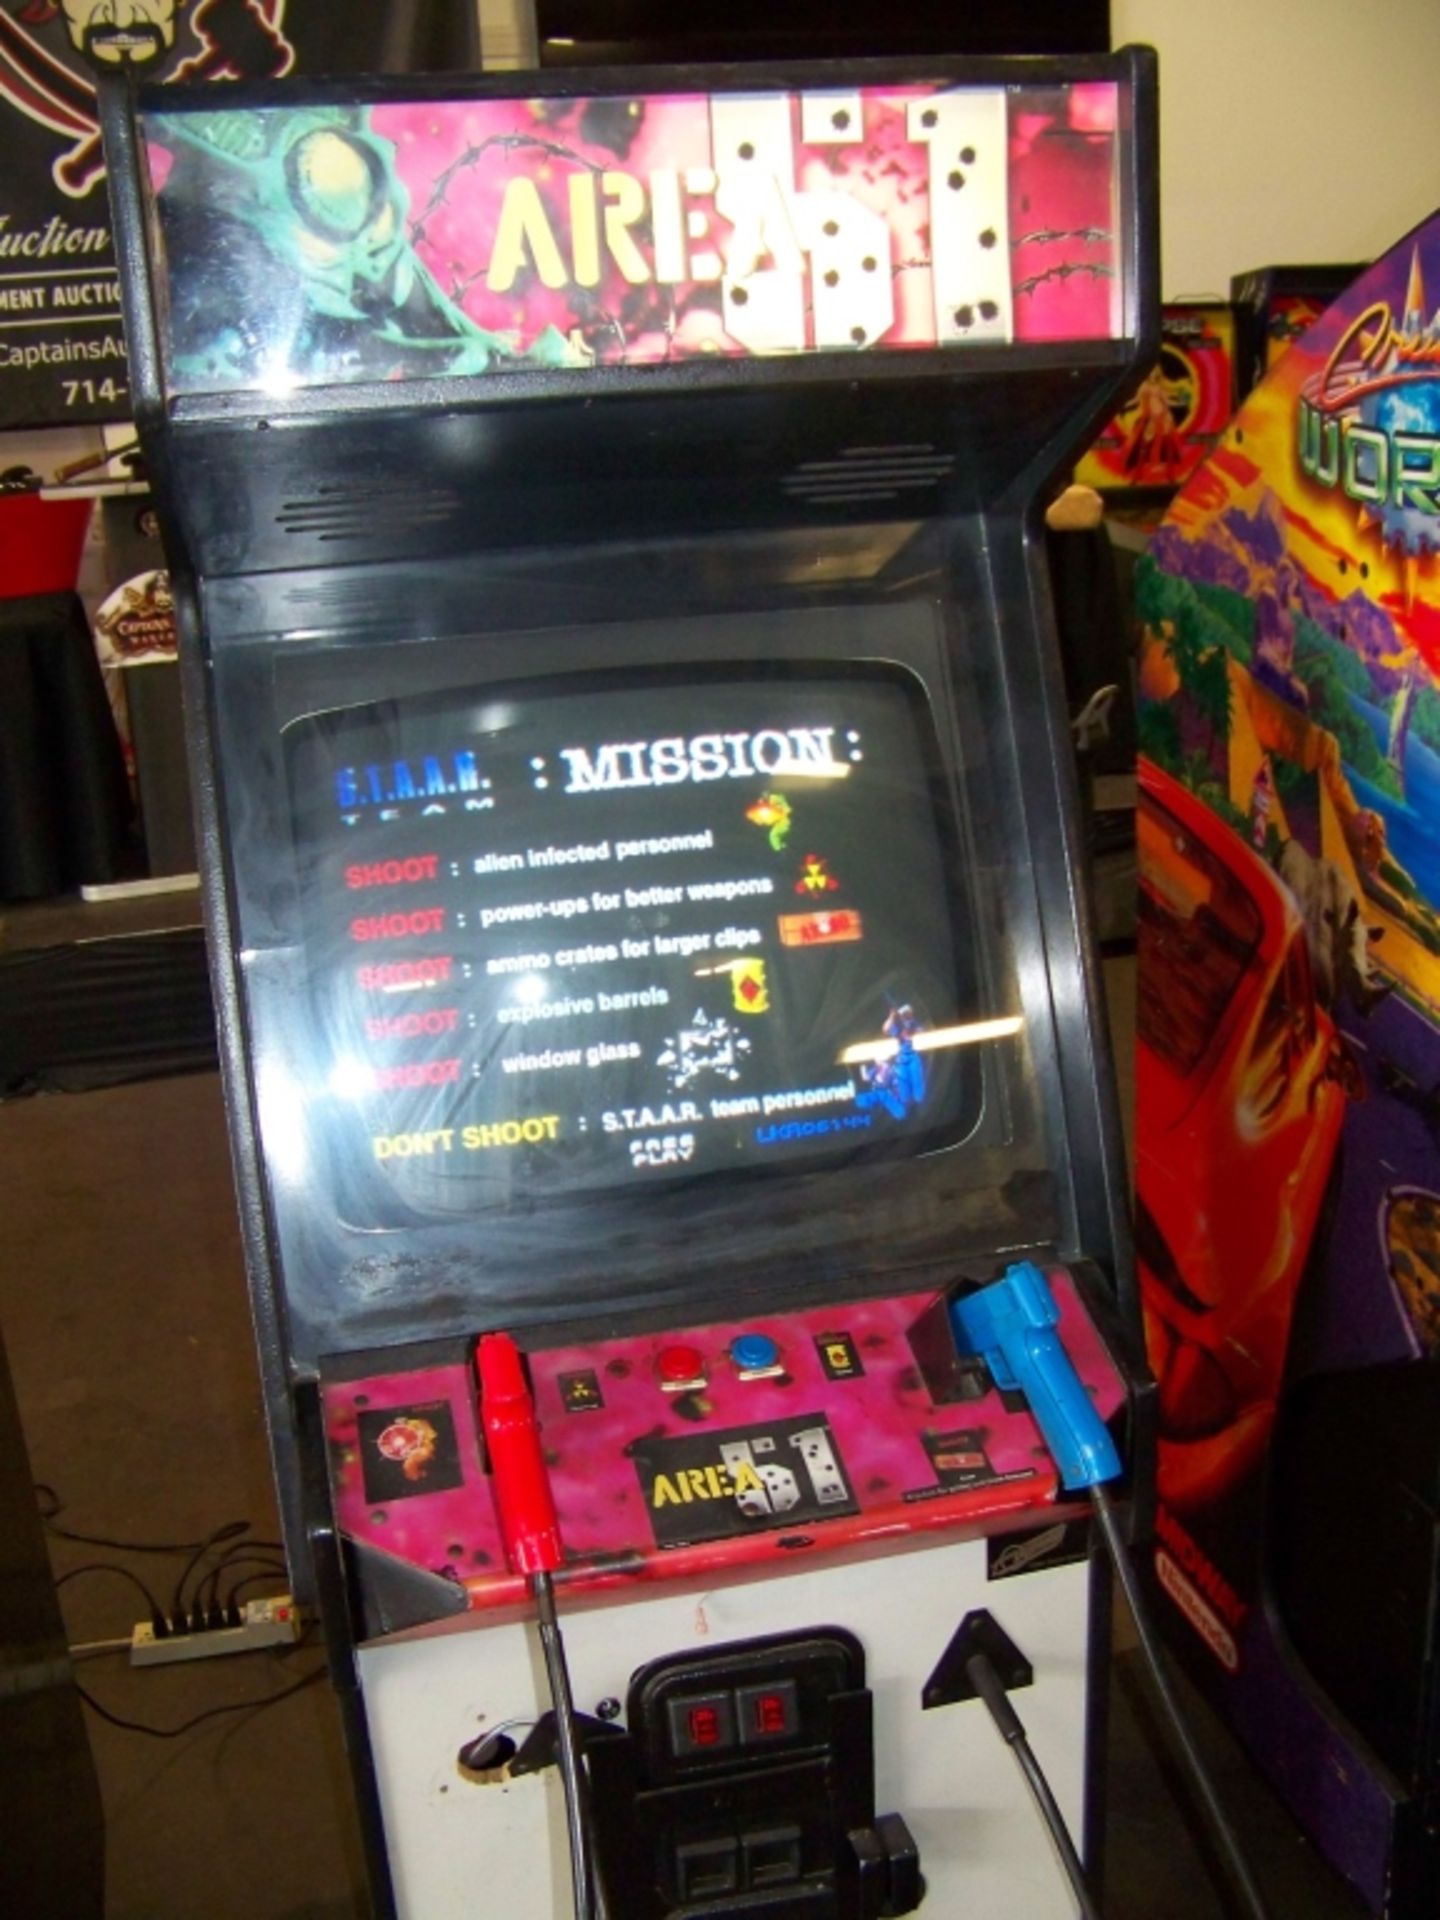 AREA 51 SHOOTER ARCADE GAME ATARI Item is in used condition. Evidence of wear and commercial - Image 2 of 3